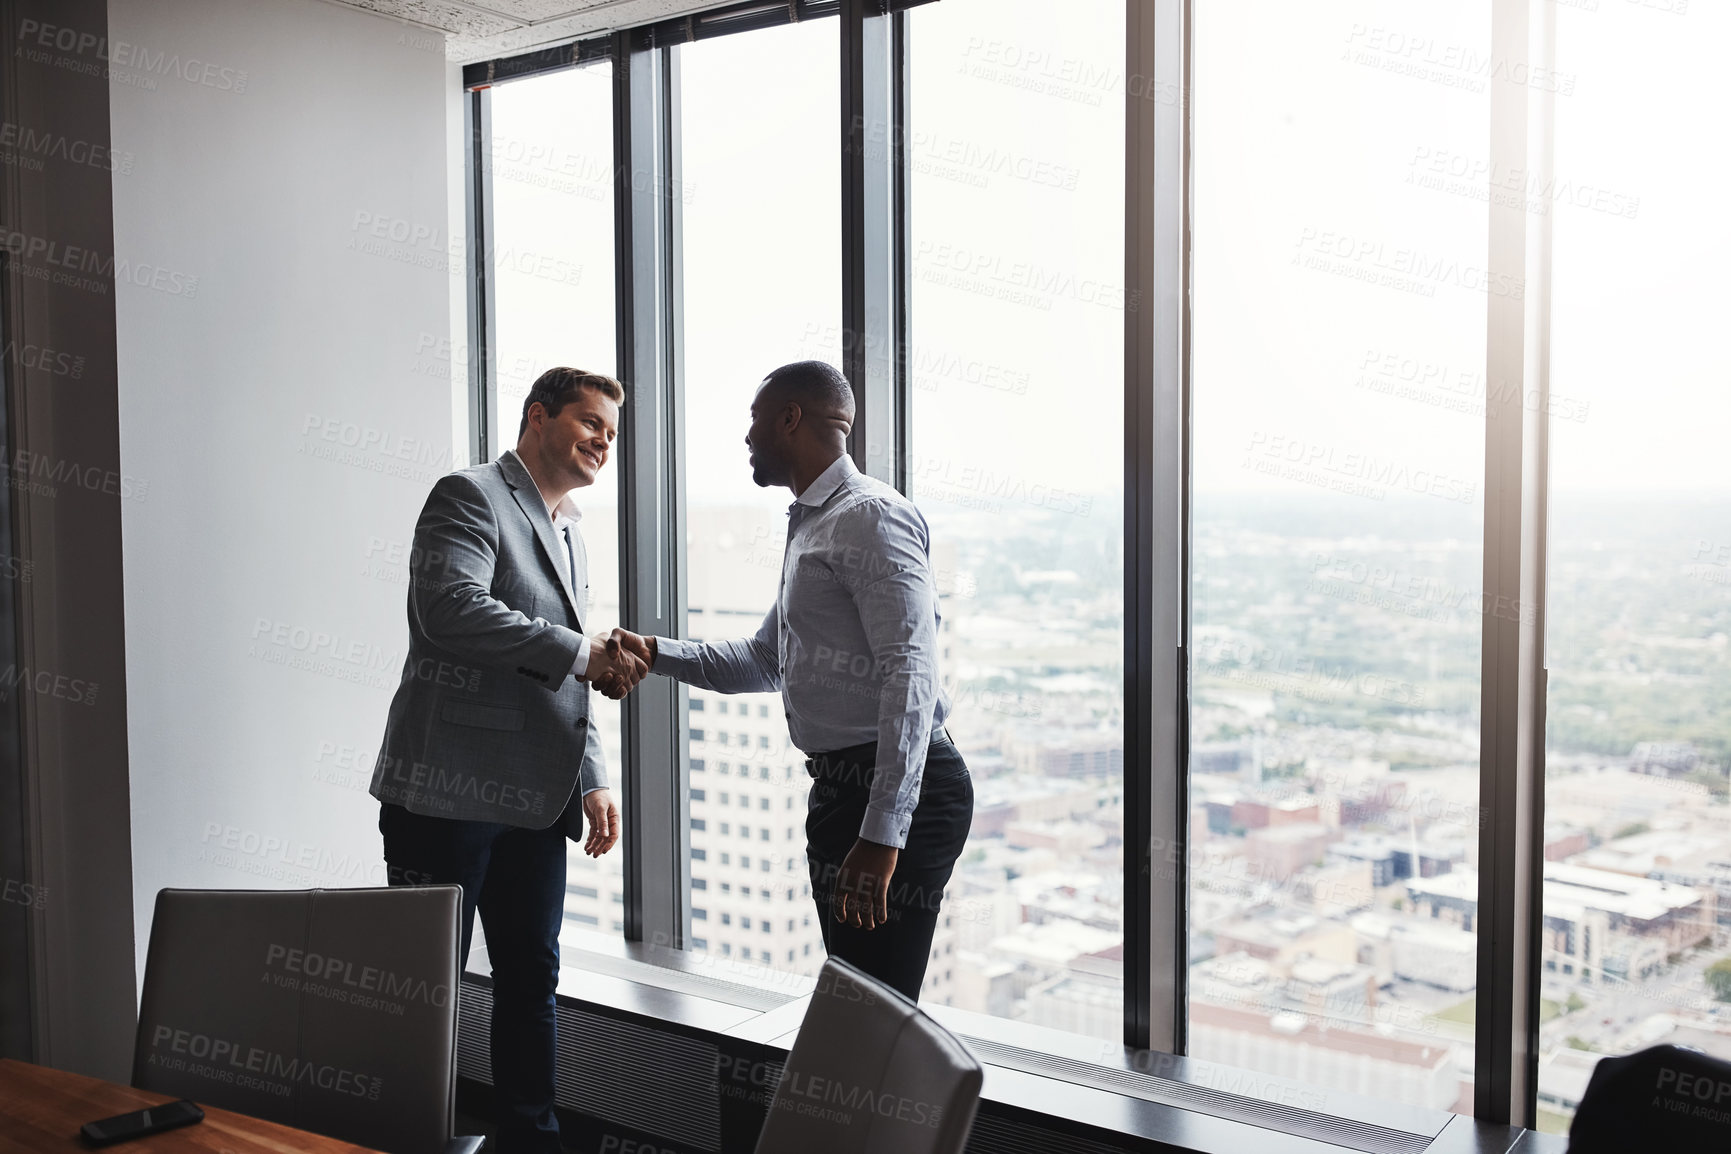 Buy stock photo High angle shot of two corporate businessmen shaking hands during a meeting in the boardroom